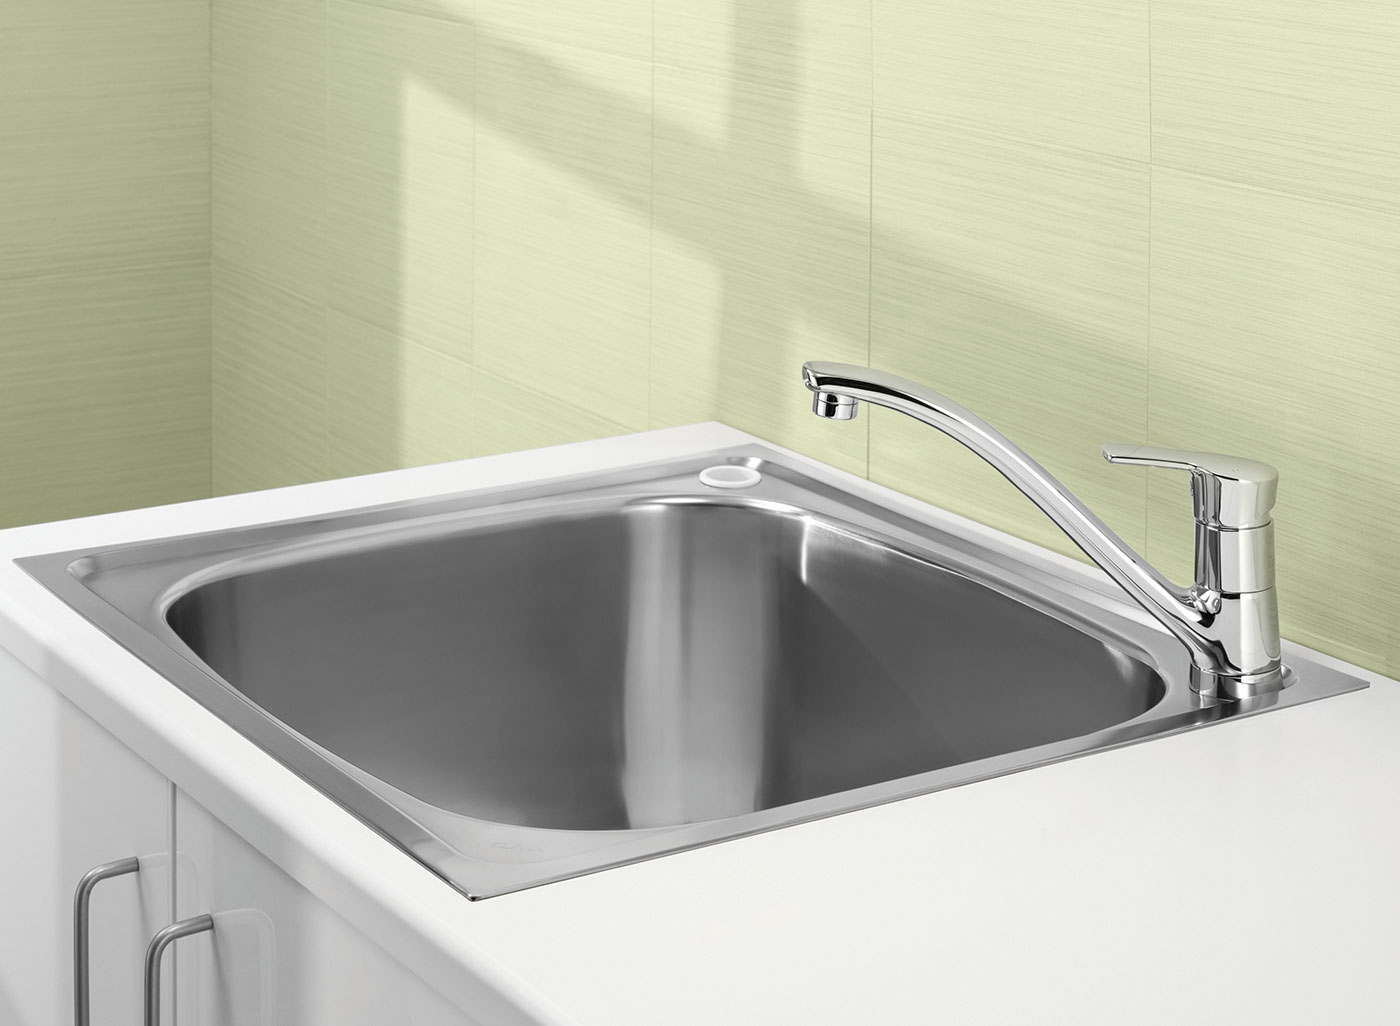 flush-fitting laundry tubs from Clark are designed to add style to any laundry.